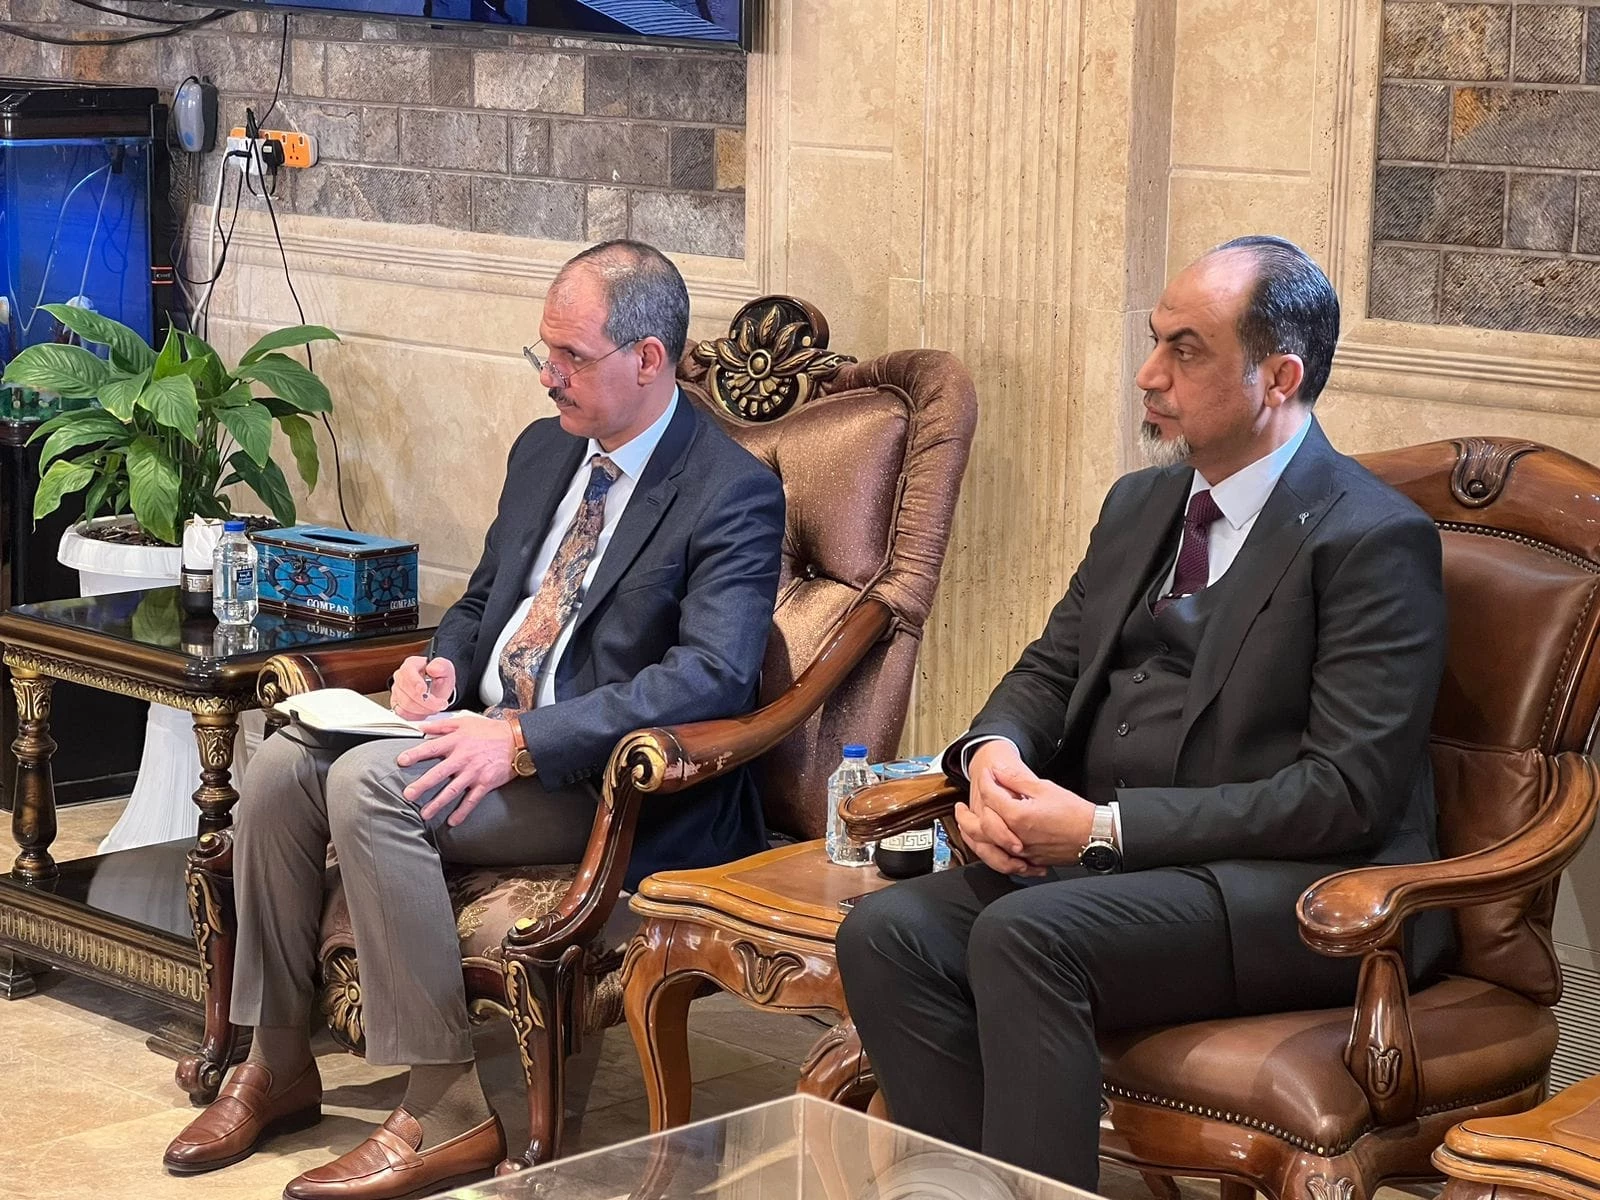 Meeting of the President of Arab Academy for Science, Technology & Maritime Transport  (AASTMT) and a Delegation from Port Training Institute (PTI) with the Iraqi Minister of Transport10